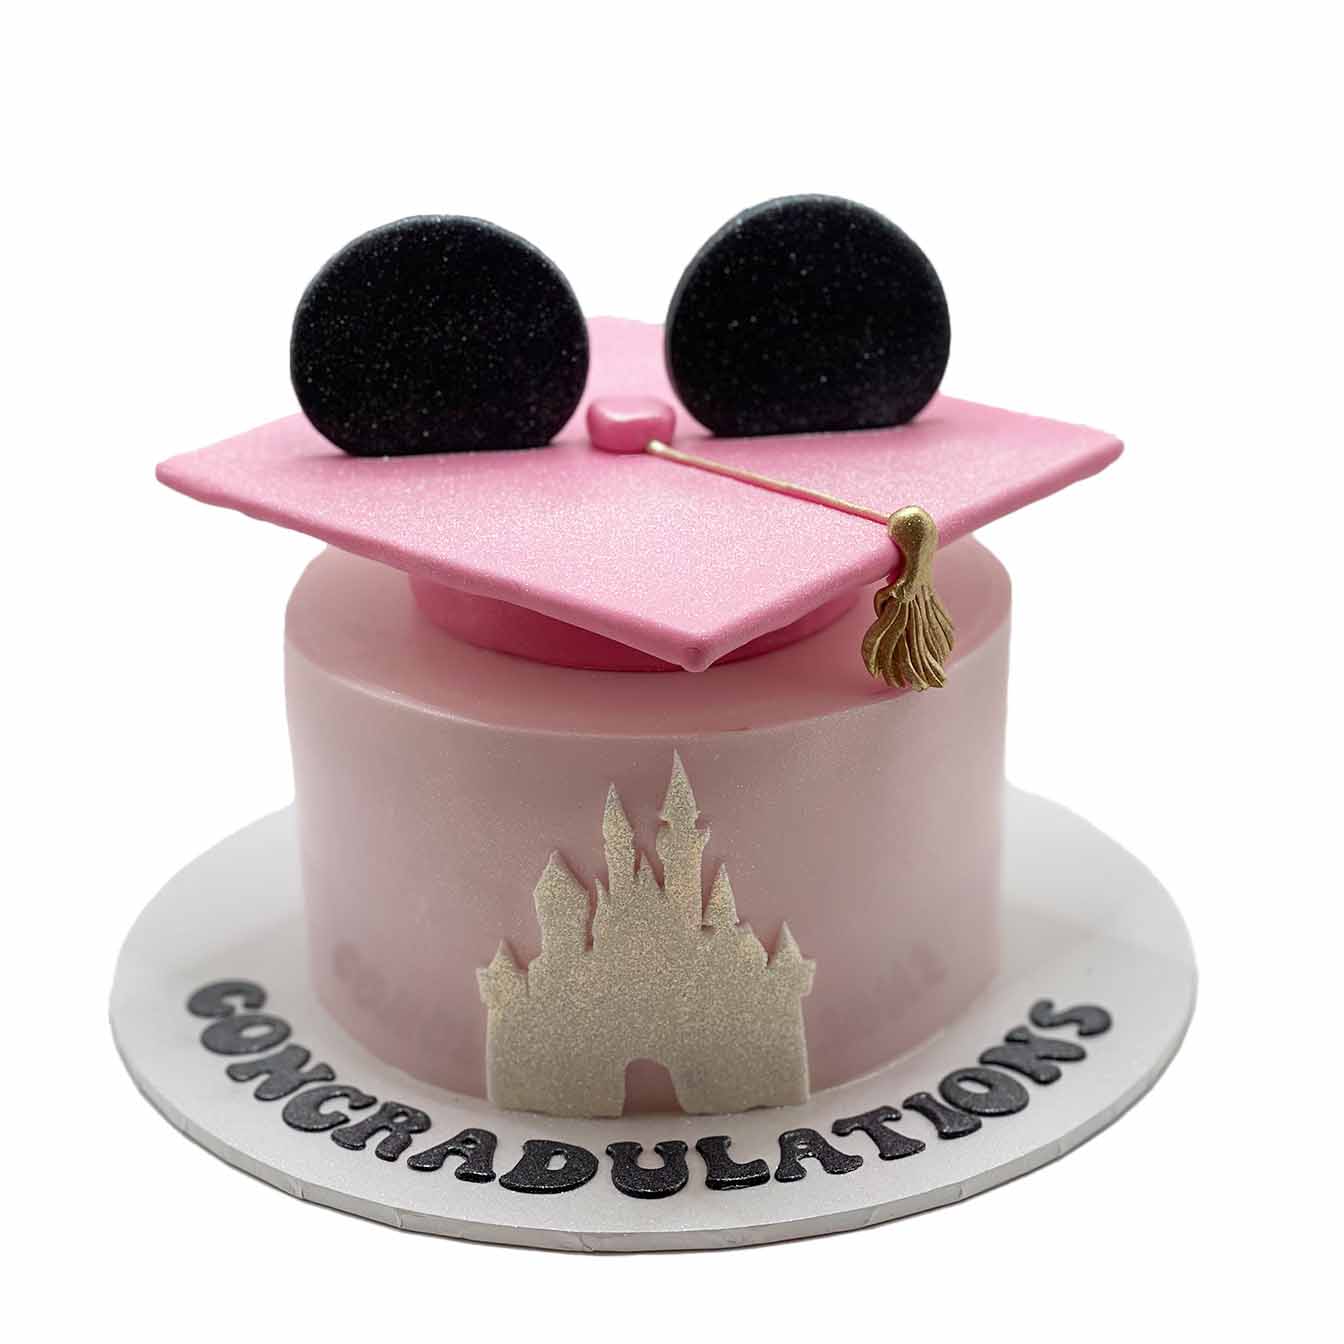 Graduation Mouse-Eared Castle Cake - A cake featuring the iconic castle on the front and mouse ears on the graduation hat, a perfect tribute to academic success and cherished memories.